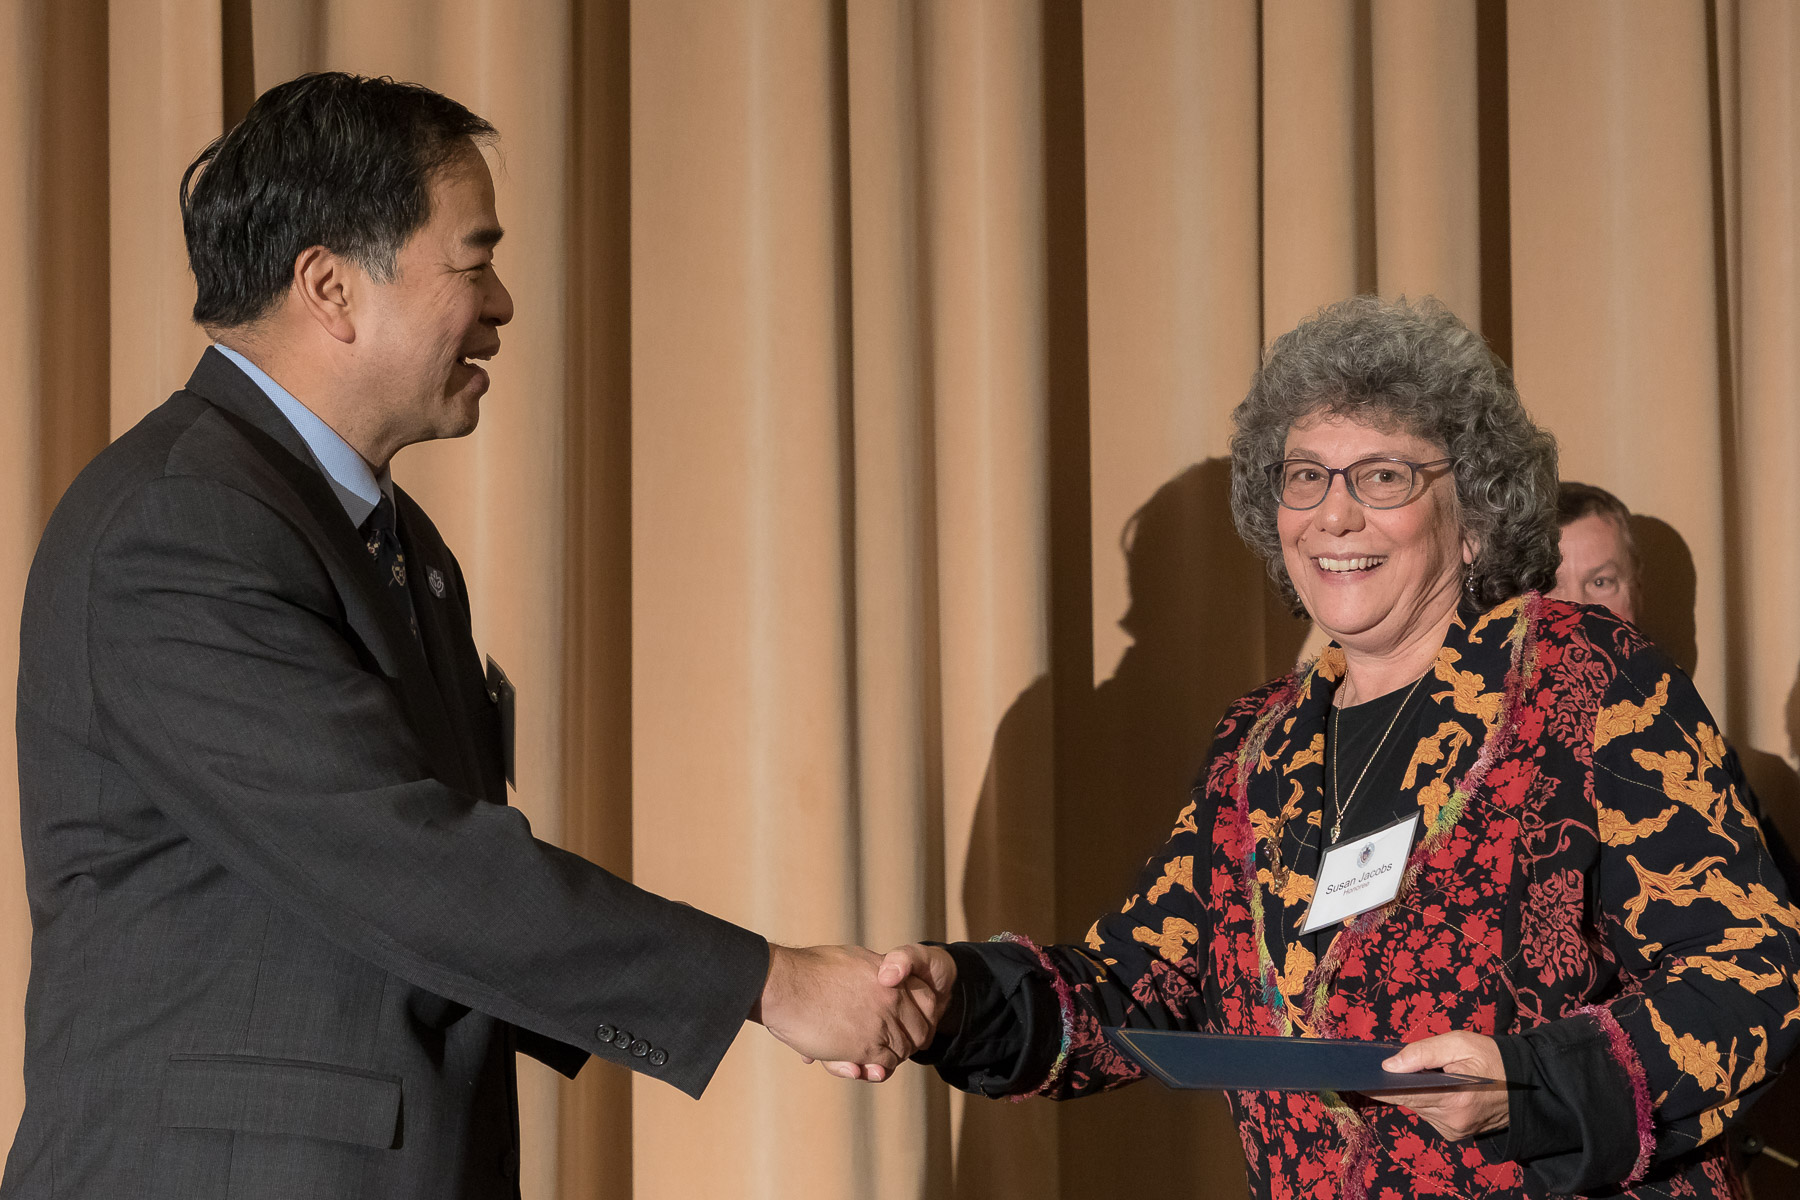 Susan Jacobs, right, with A. Gabriel Esteban, Ph.D., president, as faculty and staff members are inducted into DePaul University's 25 Year Club, Tuesday, Nov. 13, 2018, at the Lincoln Park Student Center. Employees celebrating their 25th work anniversary were honored at the luncheon with their colleagues and will have their names added to plaques located on the Loop and Lincoln Park Campuses. (DePaul University/Jeff Carrion)